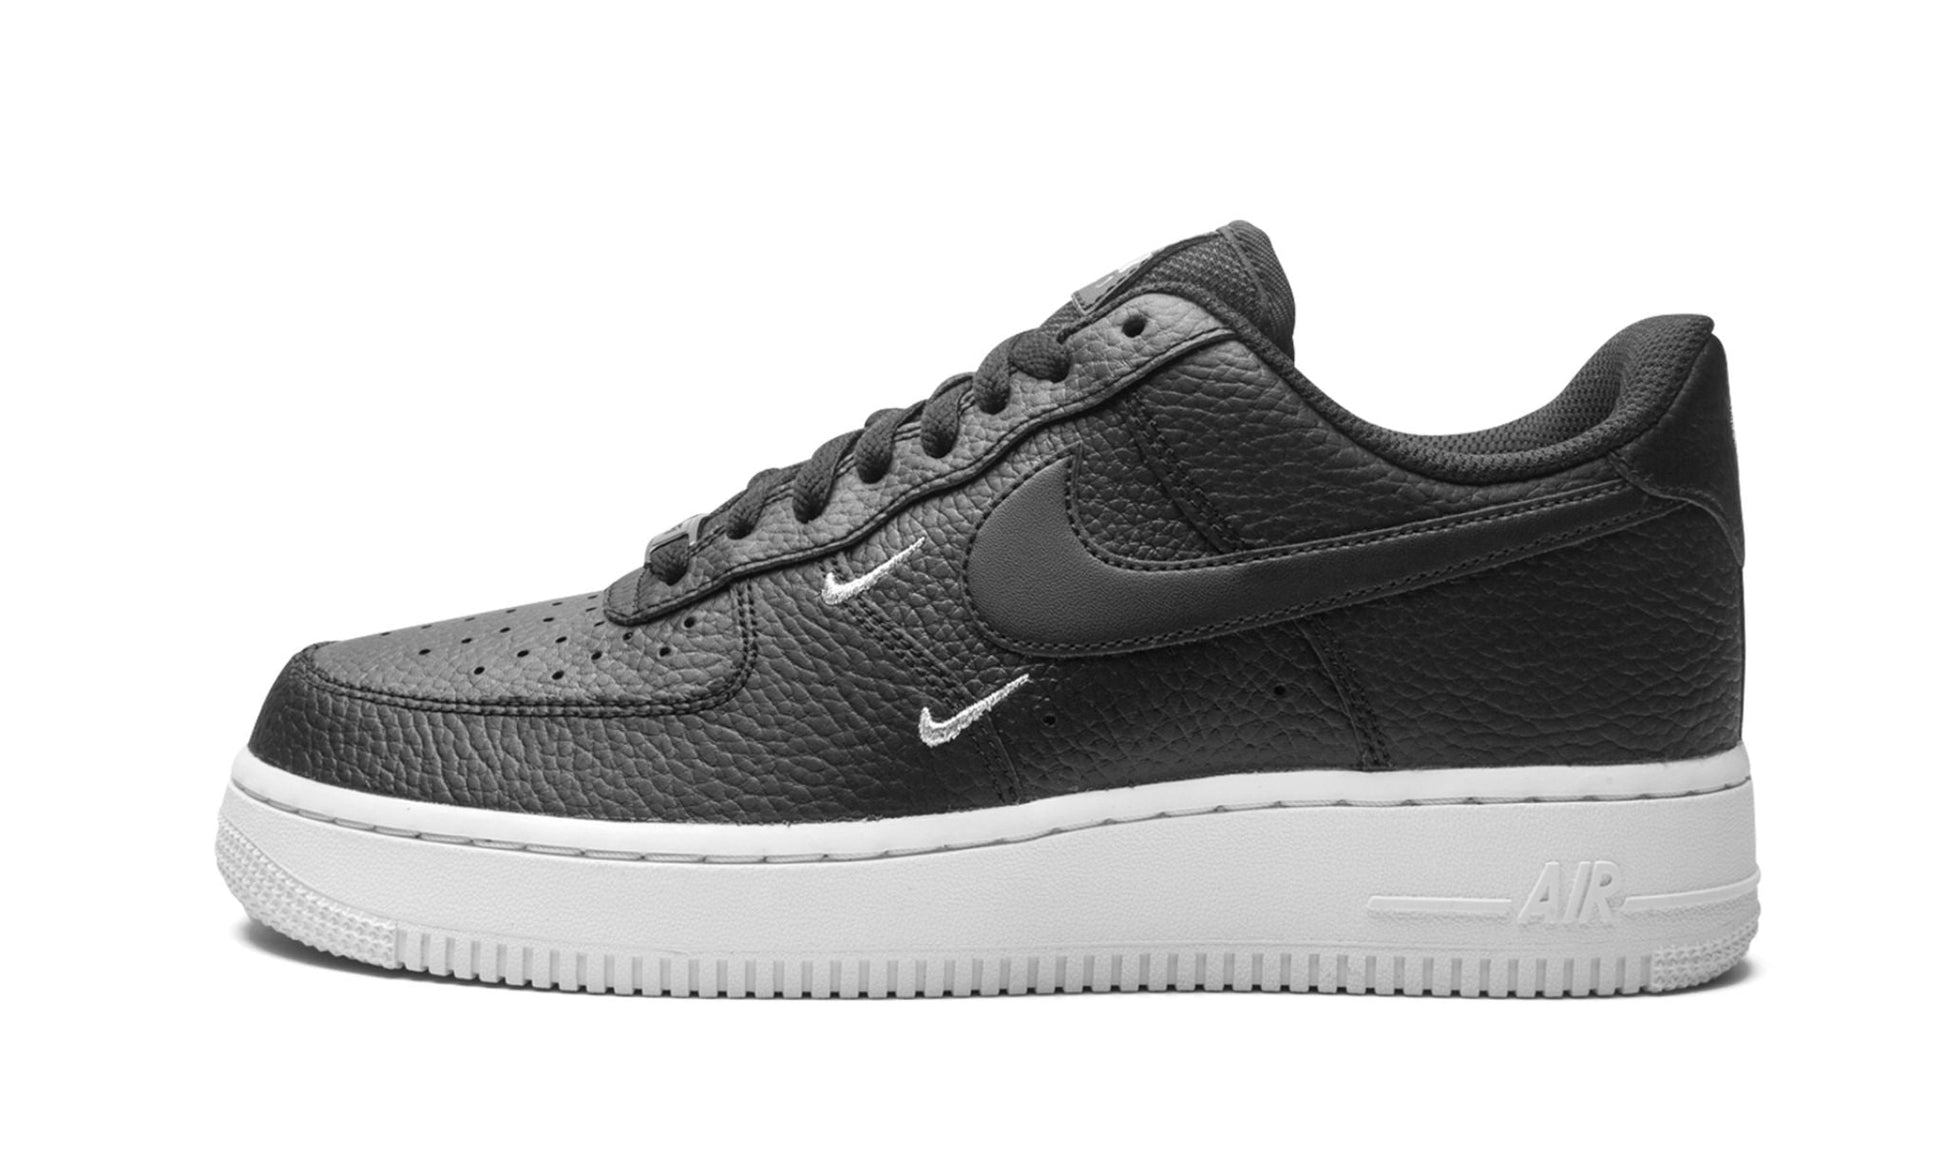 WMNS Air Force 1 '07 ESS "Tumbled Leather"